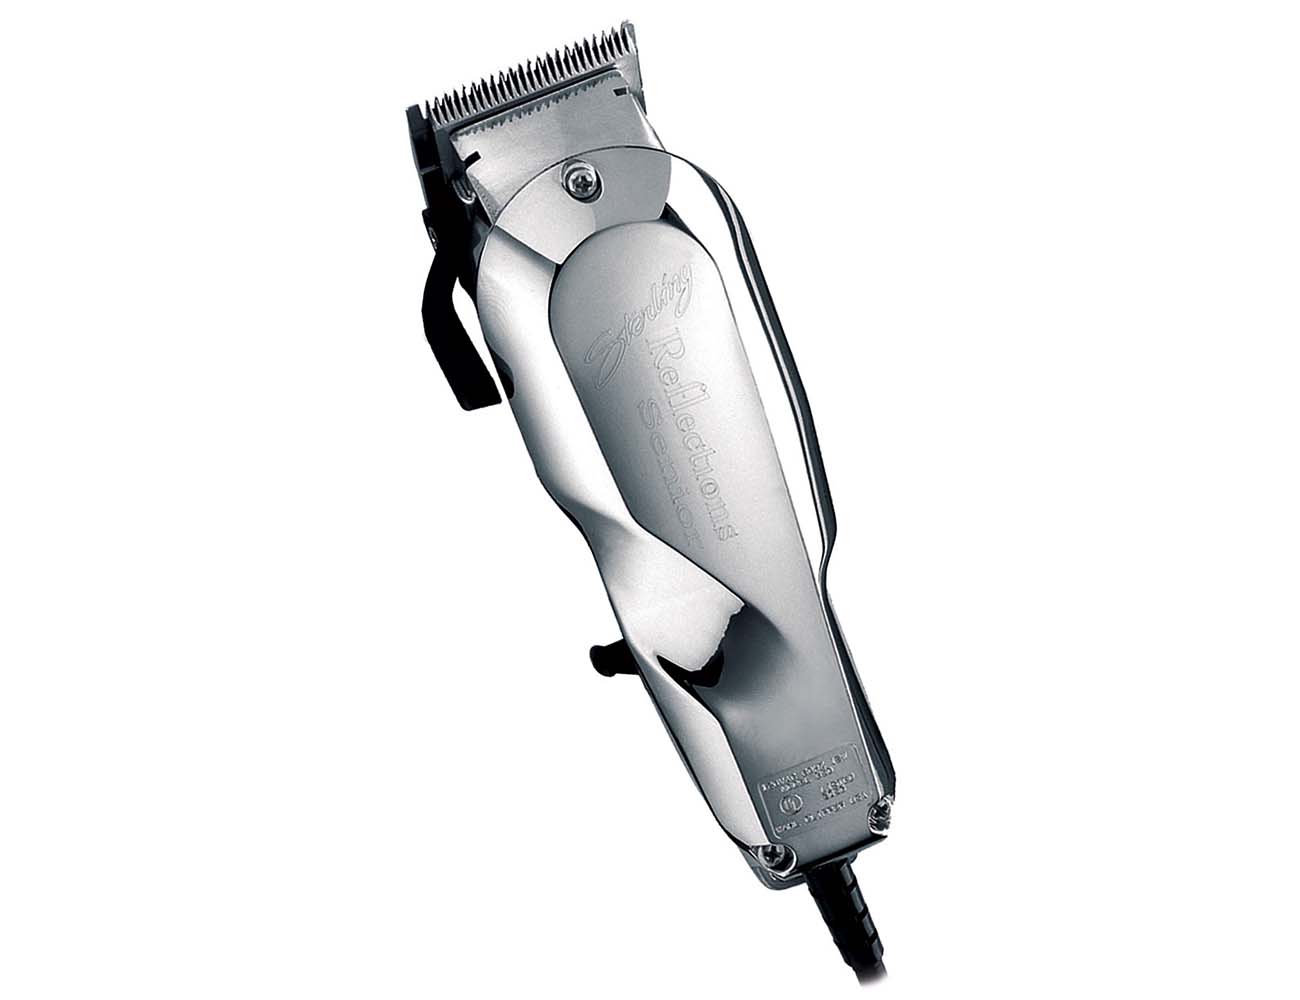 sterling wahl clipper